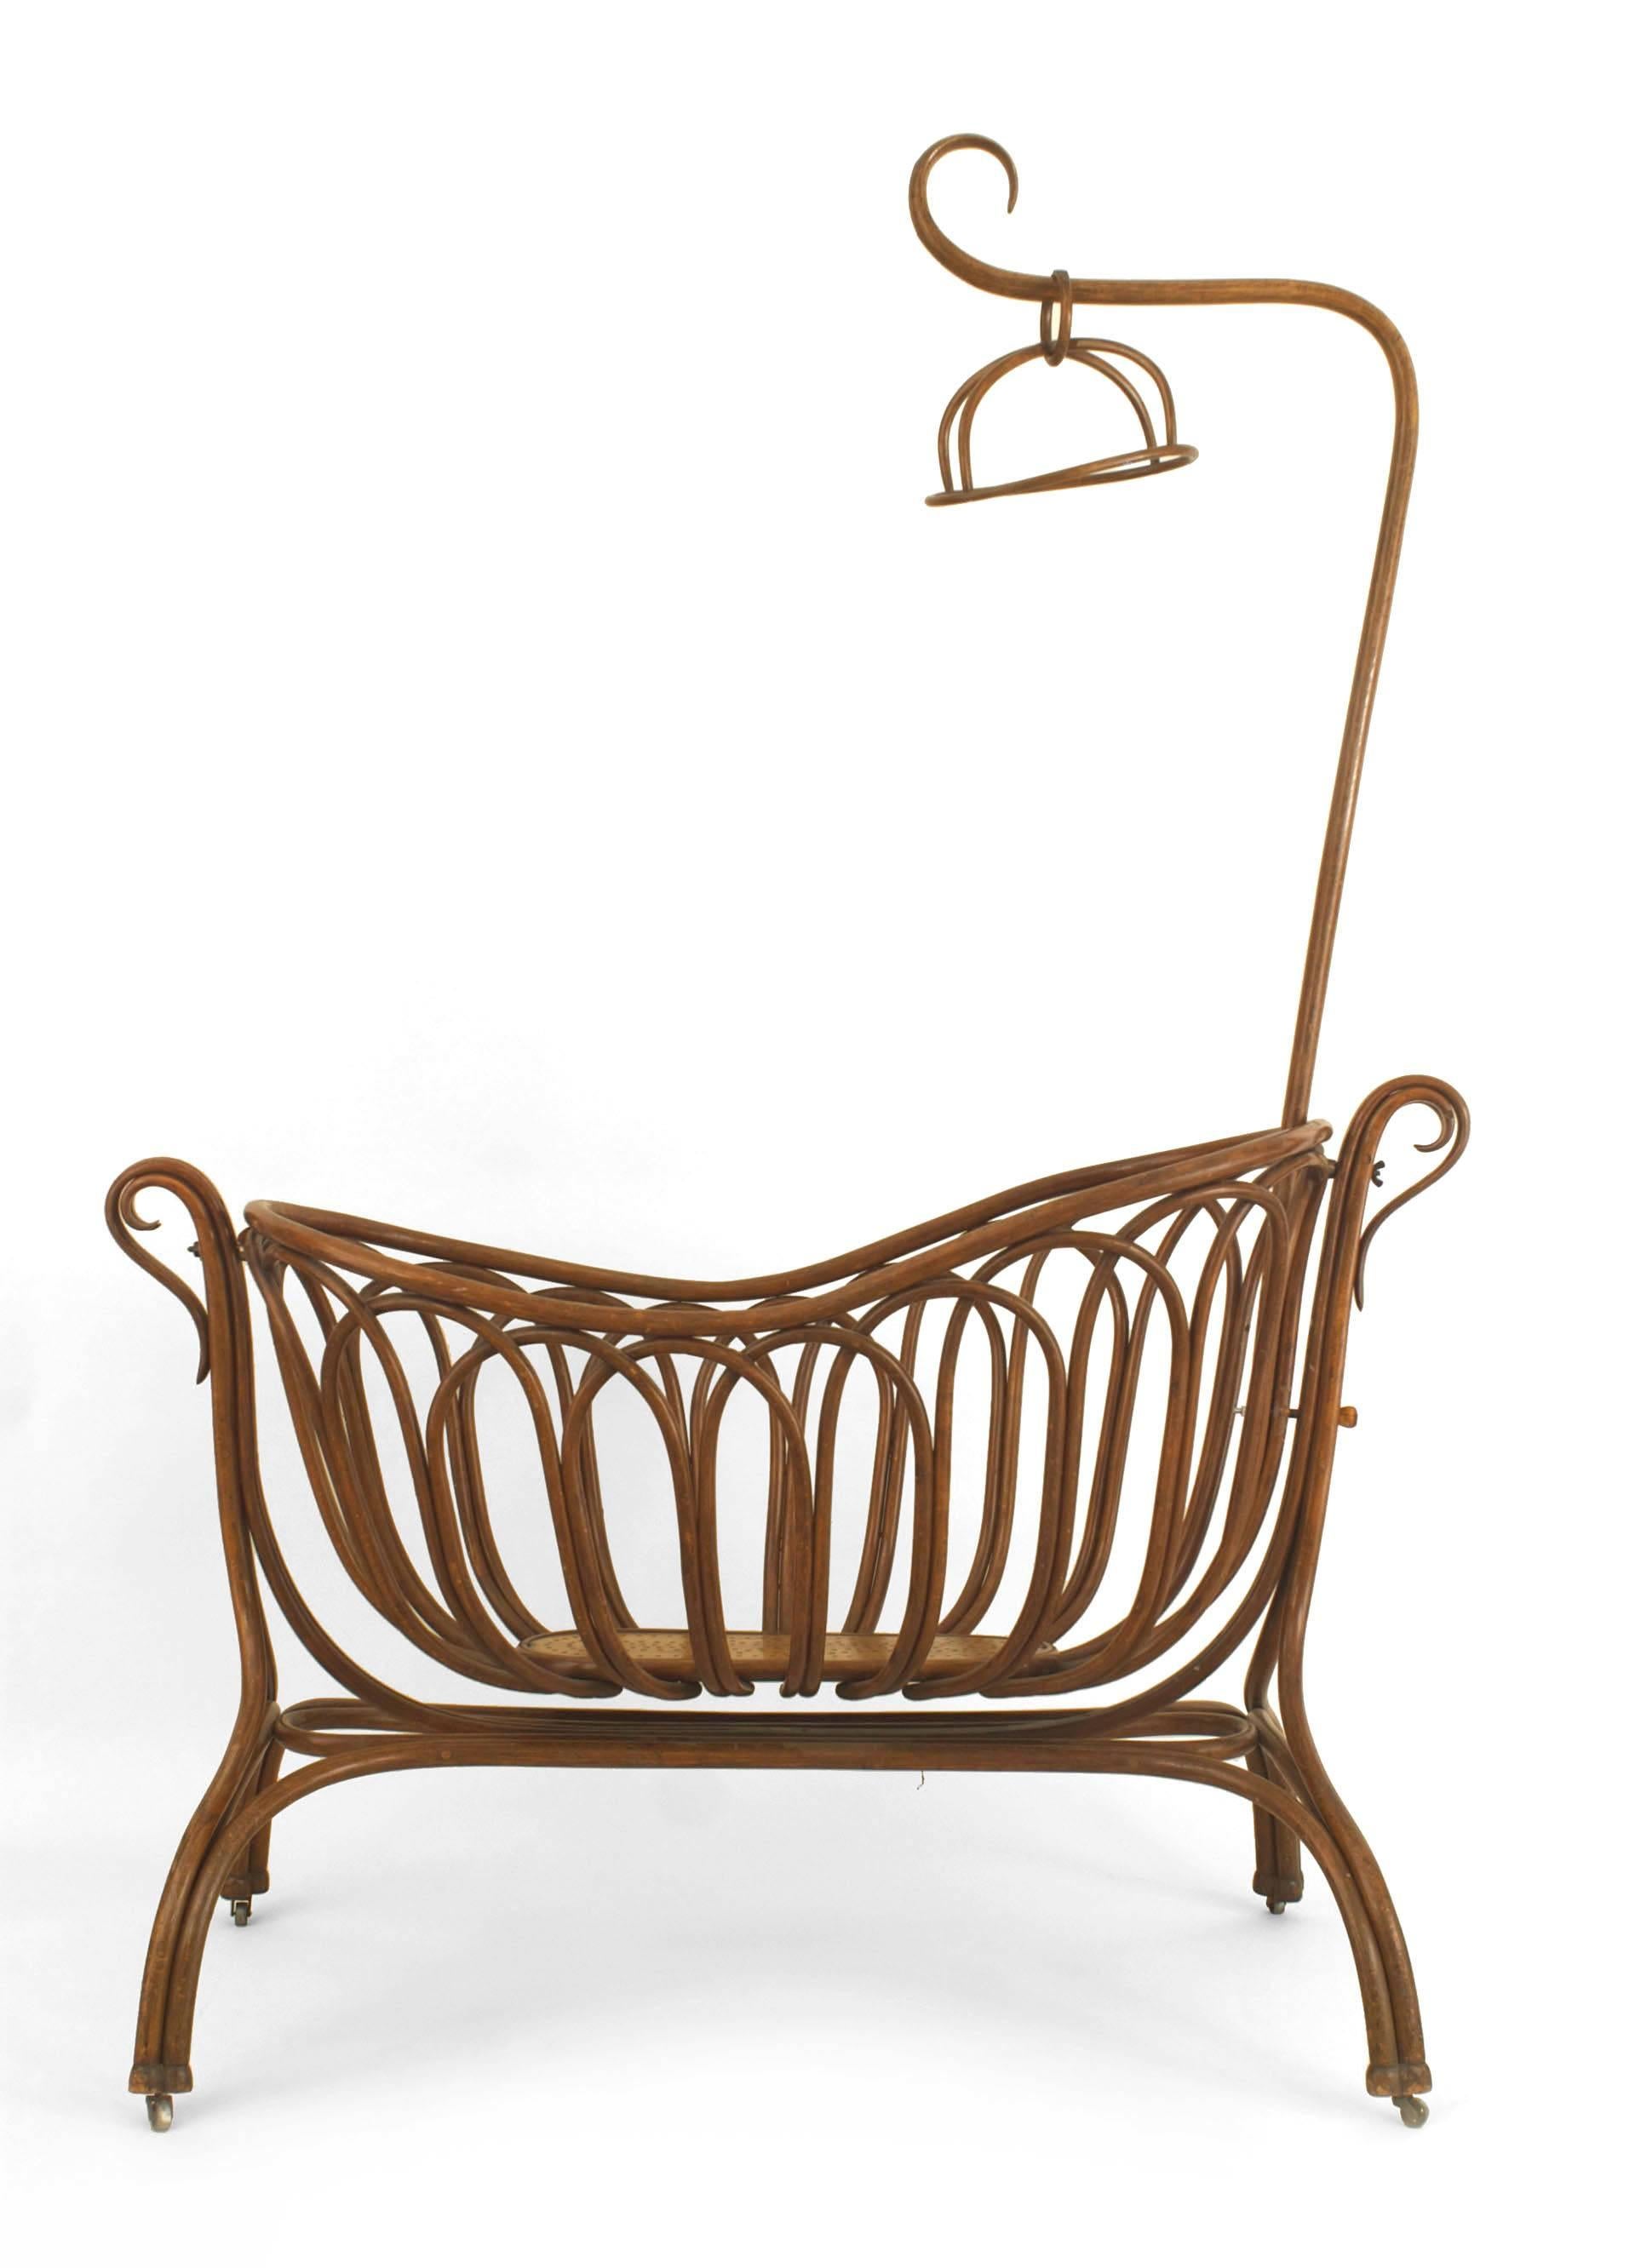 Austrian bentwood large cradle on stand with canopy. (19/20th Cent)
